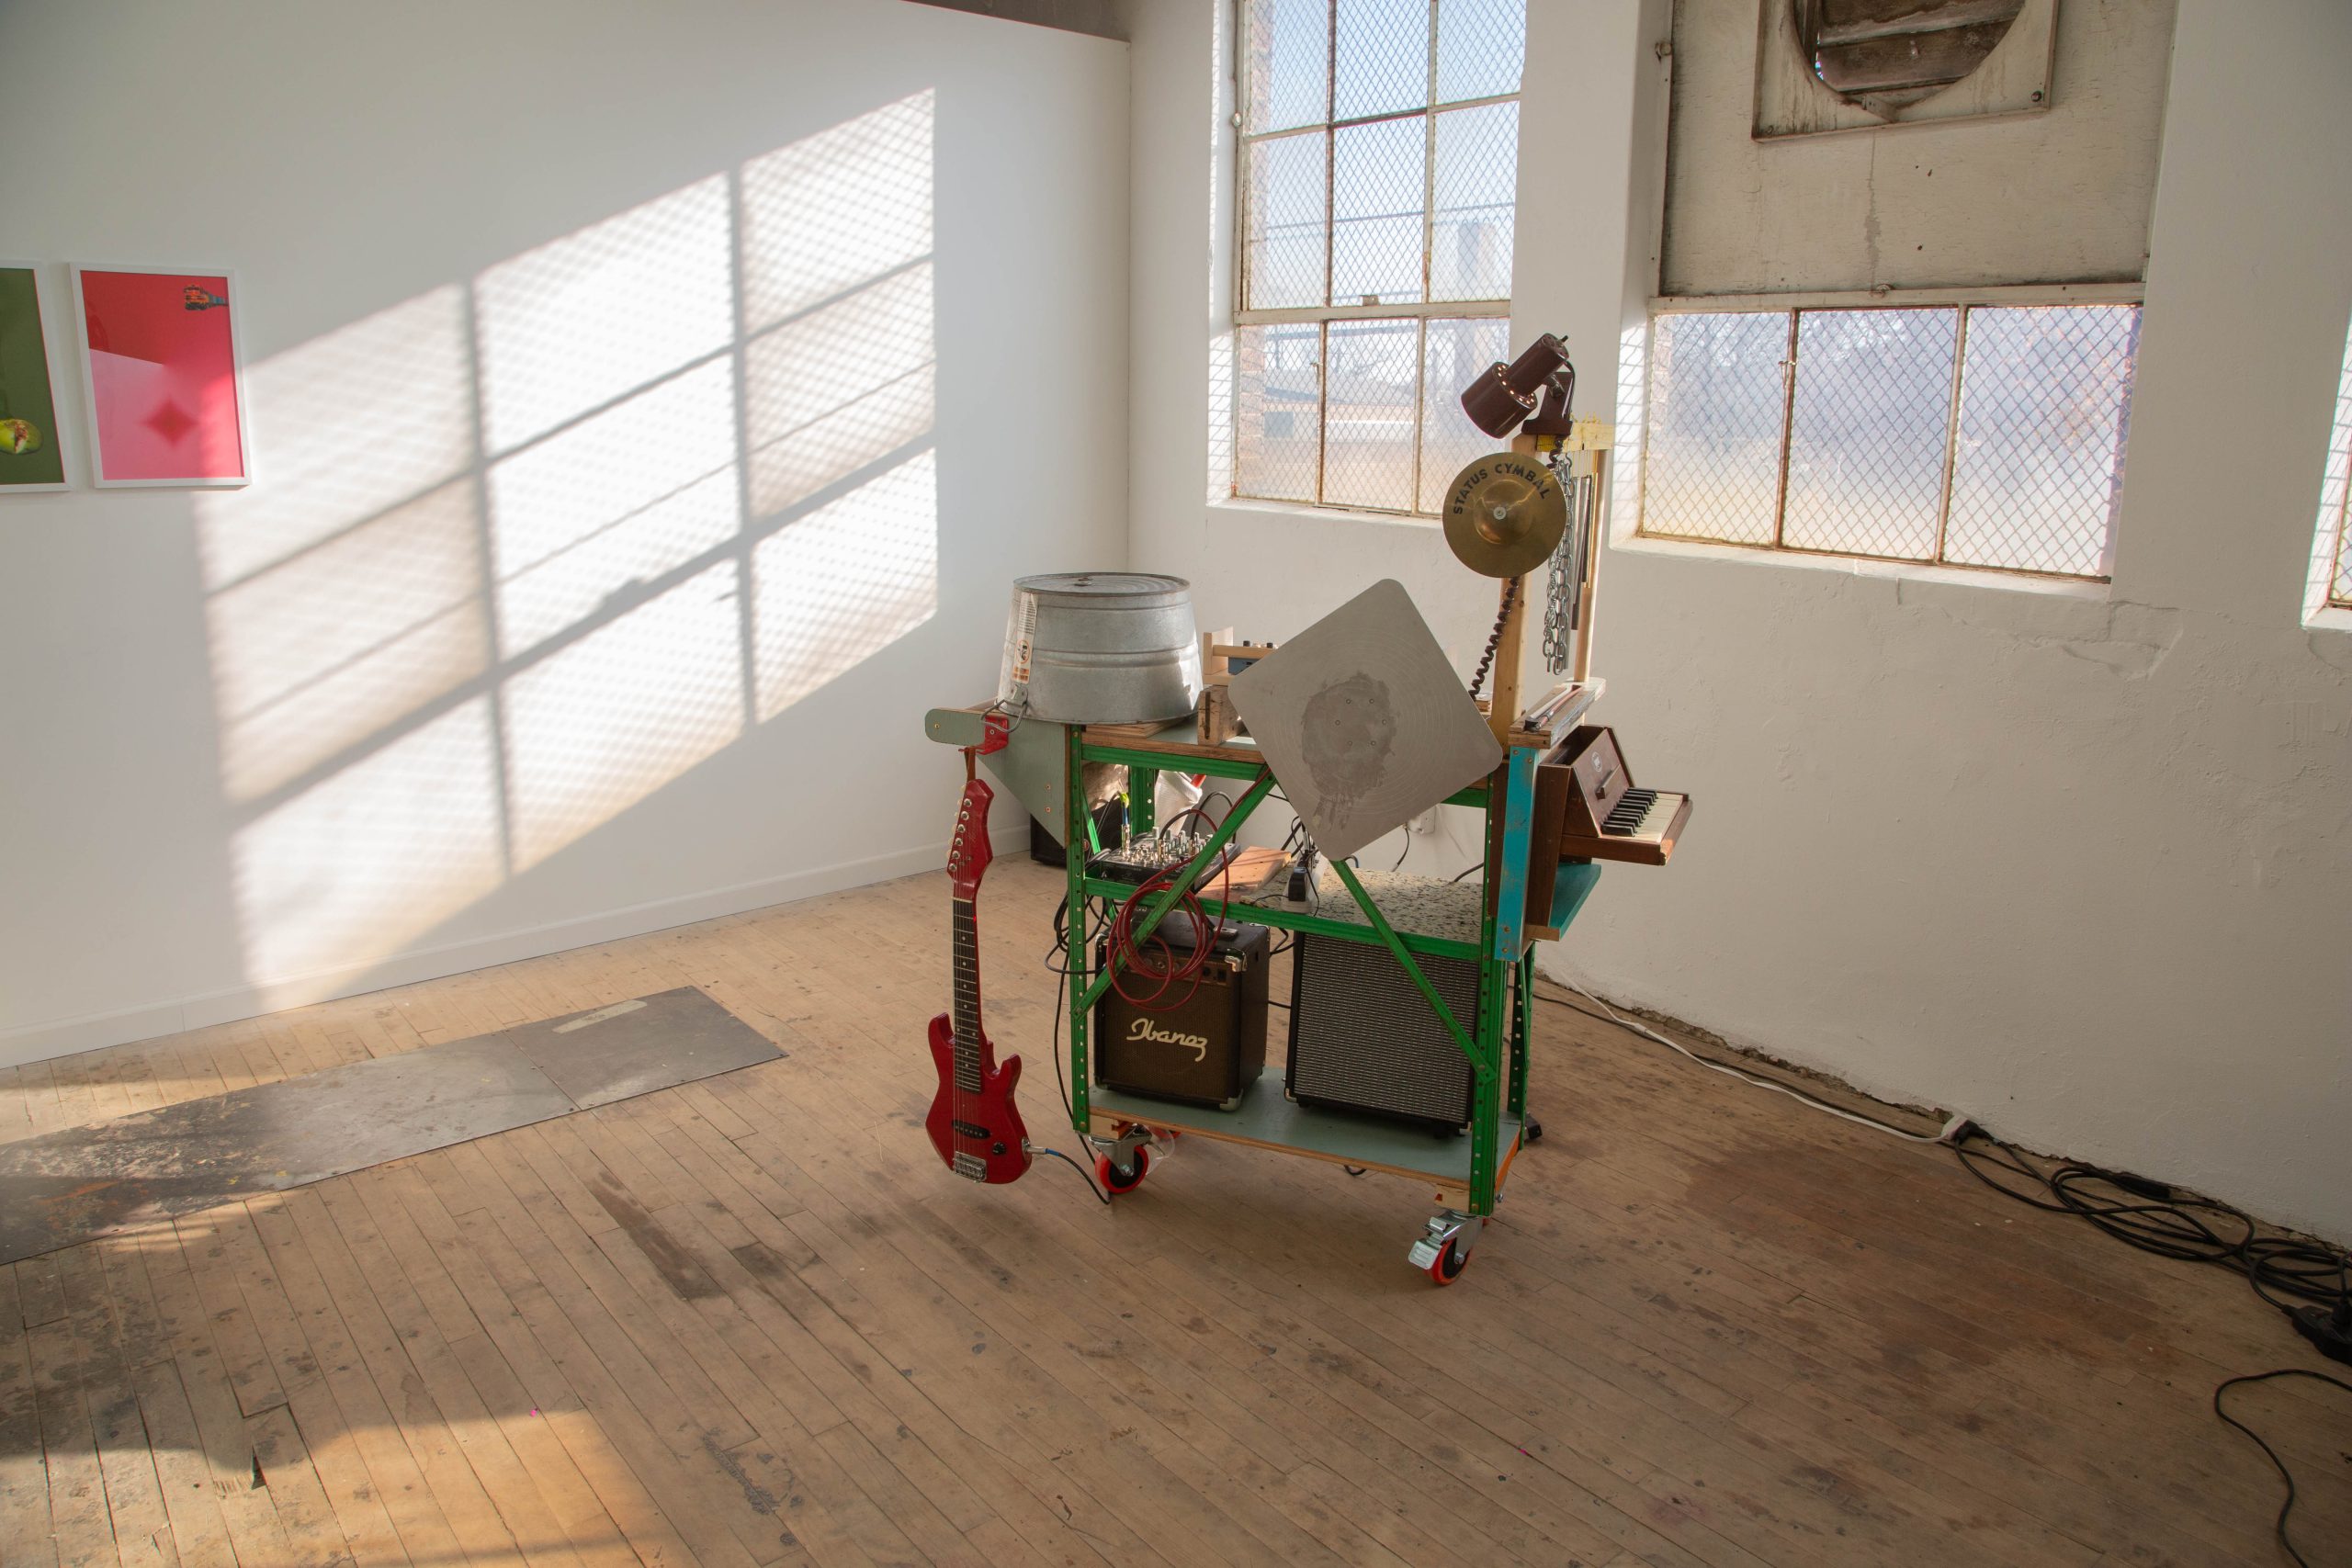 Image: Madeleine Aguilar, "Mobile Music Maker iii," 2022. A rolling cart is filled with an assortment of instruments, including a guitar, keyboard, and speaker, as well as handmade chimes, a drywall scraper, rulers, and found wood. Image courtesy of the artist and The Plan.